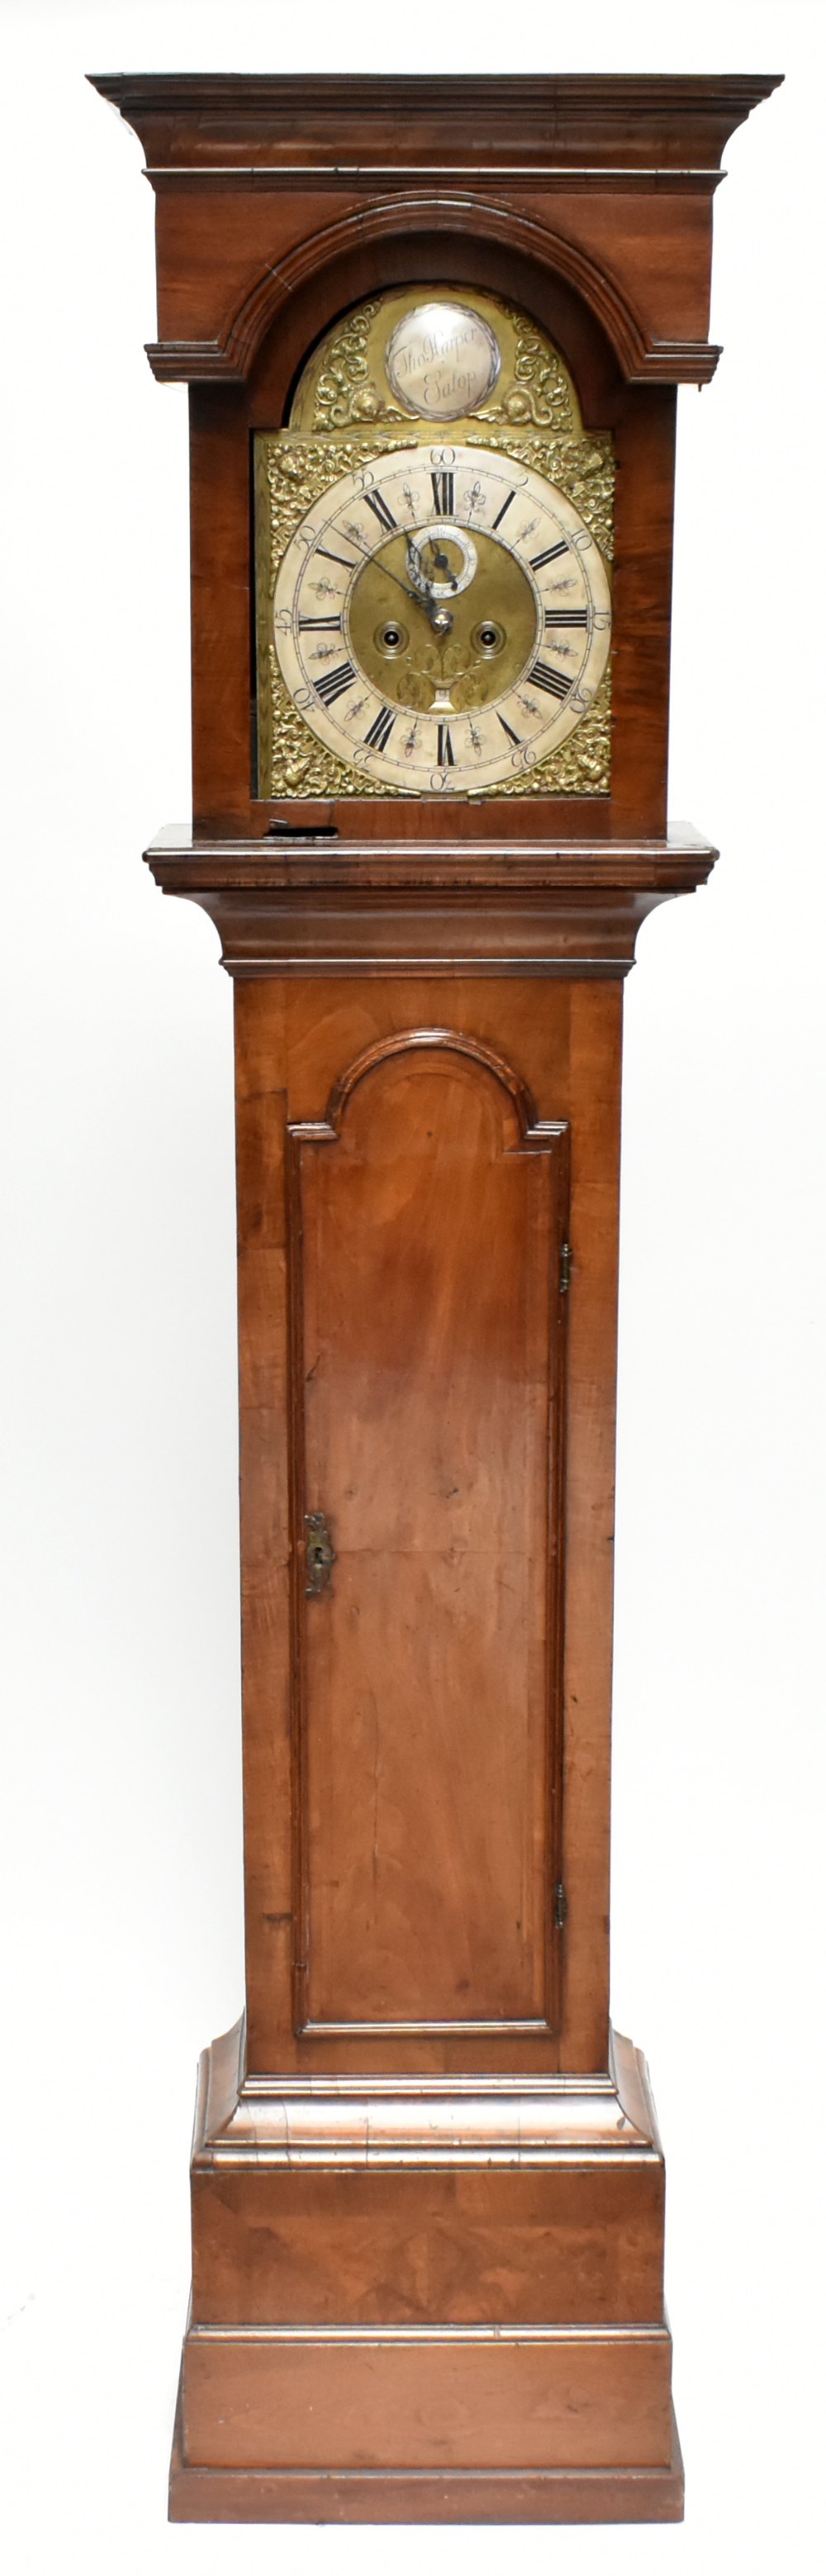 THOMAS HARPER SALOP; an 18th century eight day longcase clock, the brass face with applied